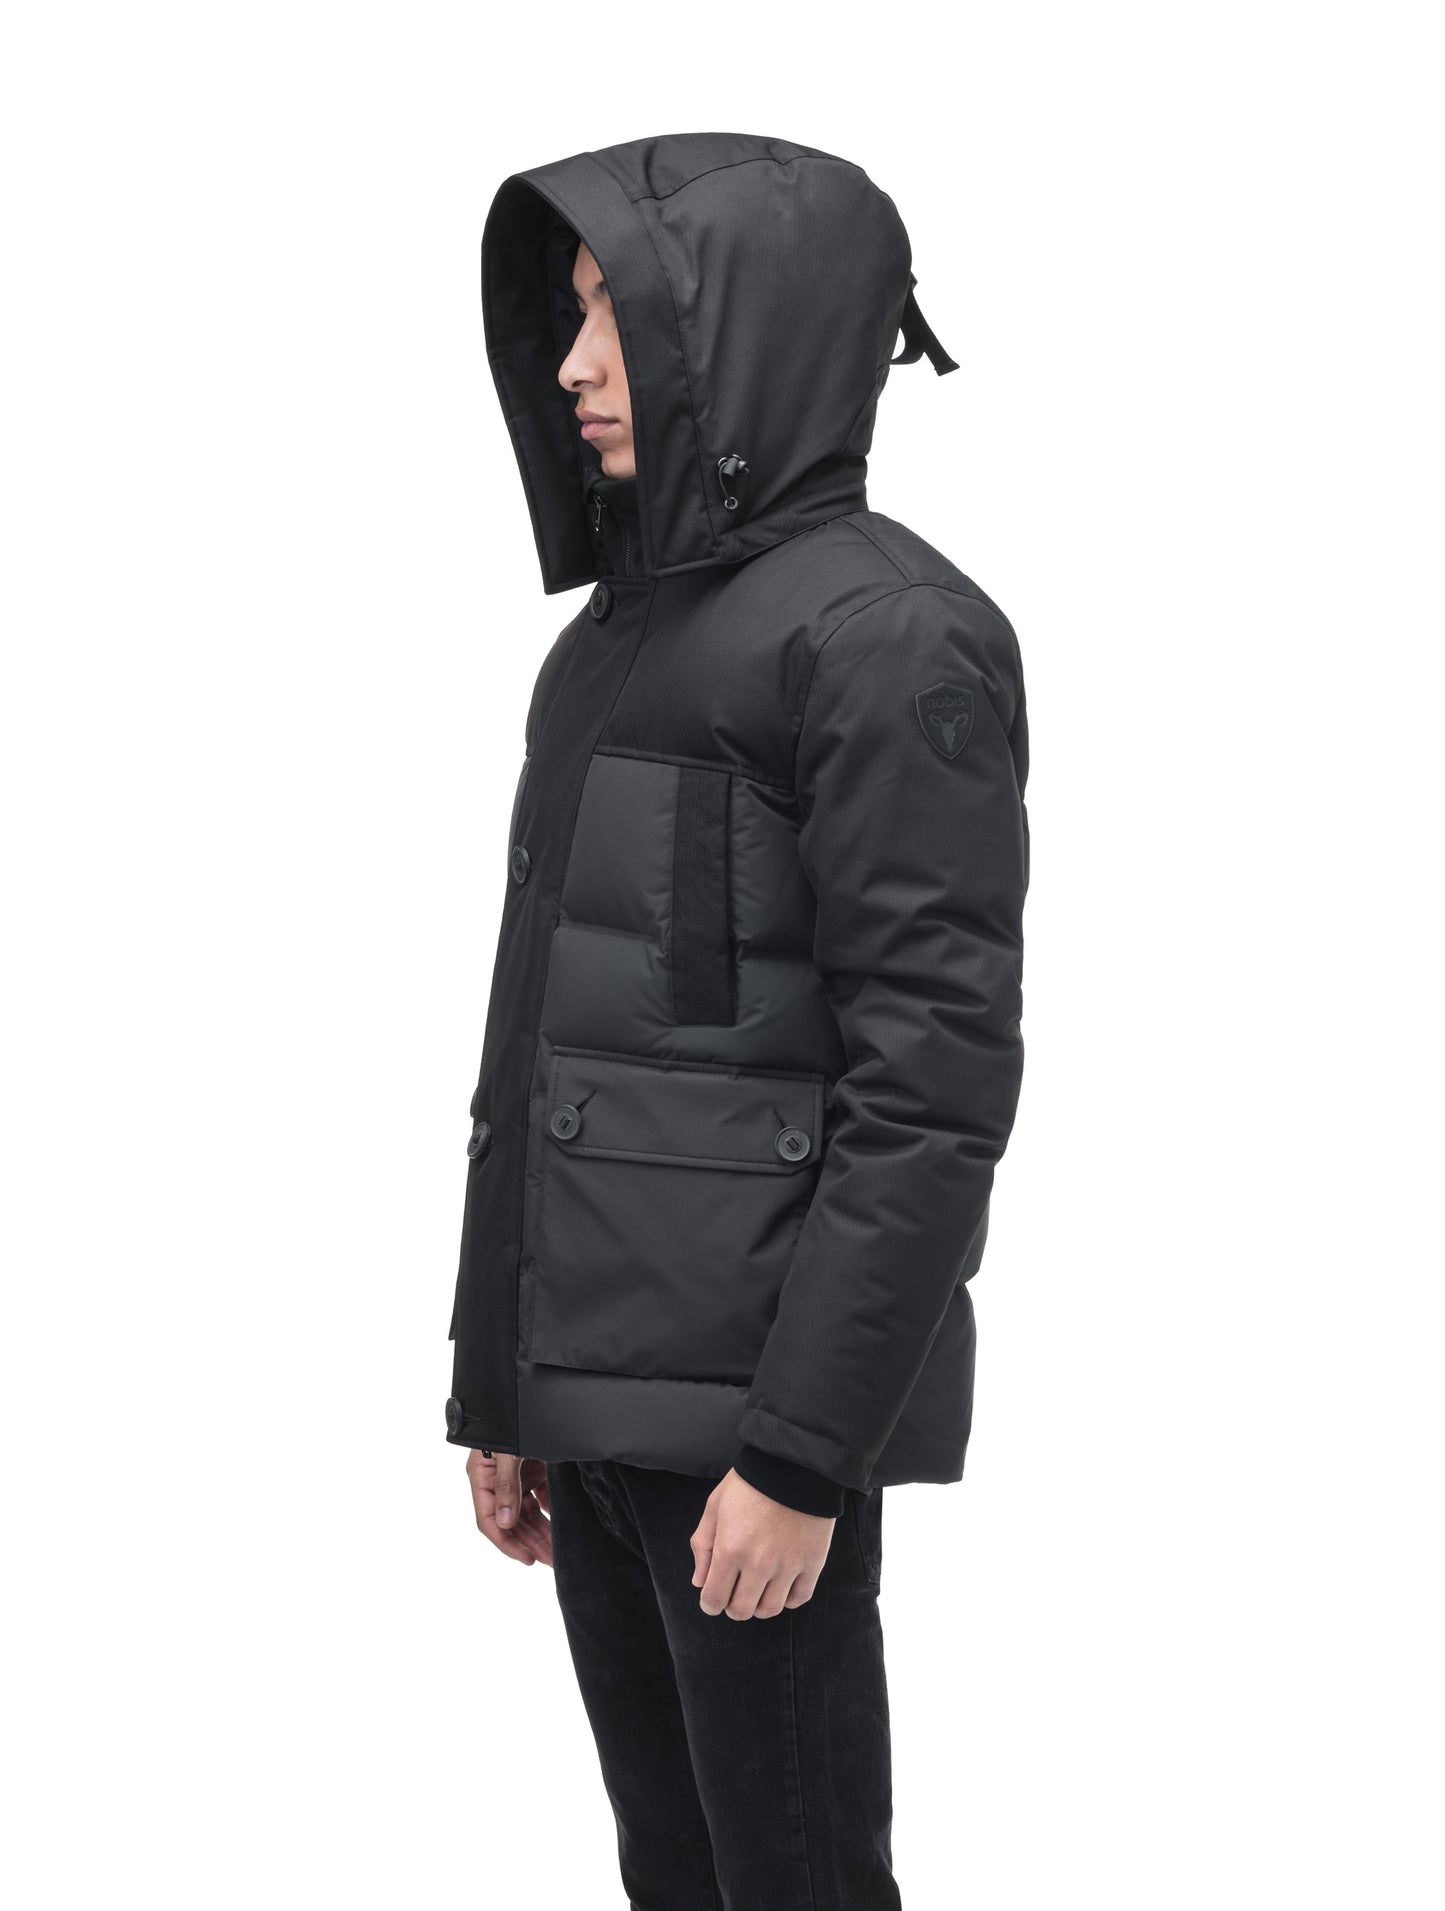 Cardinal Men's Puffer Parka in hip length, Canadian duck down insulation, removable hood, quilted body, and two-way front zipper, in Black